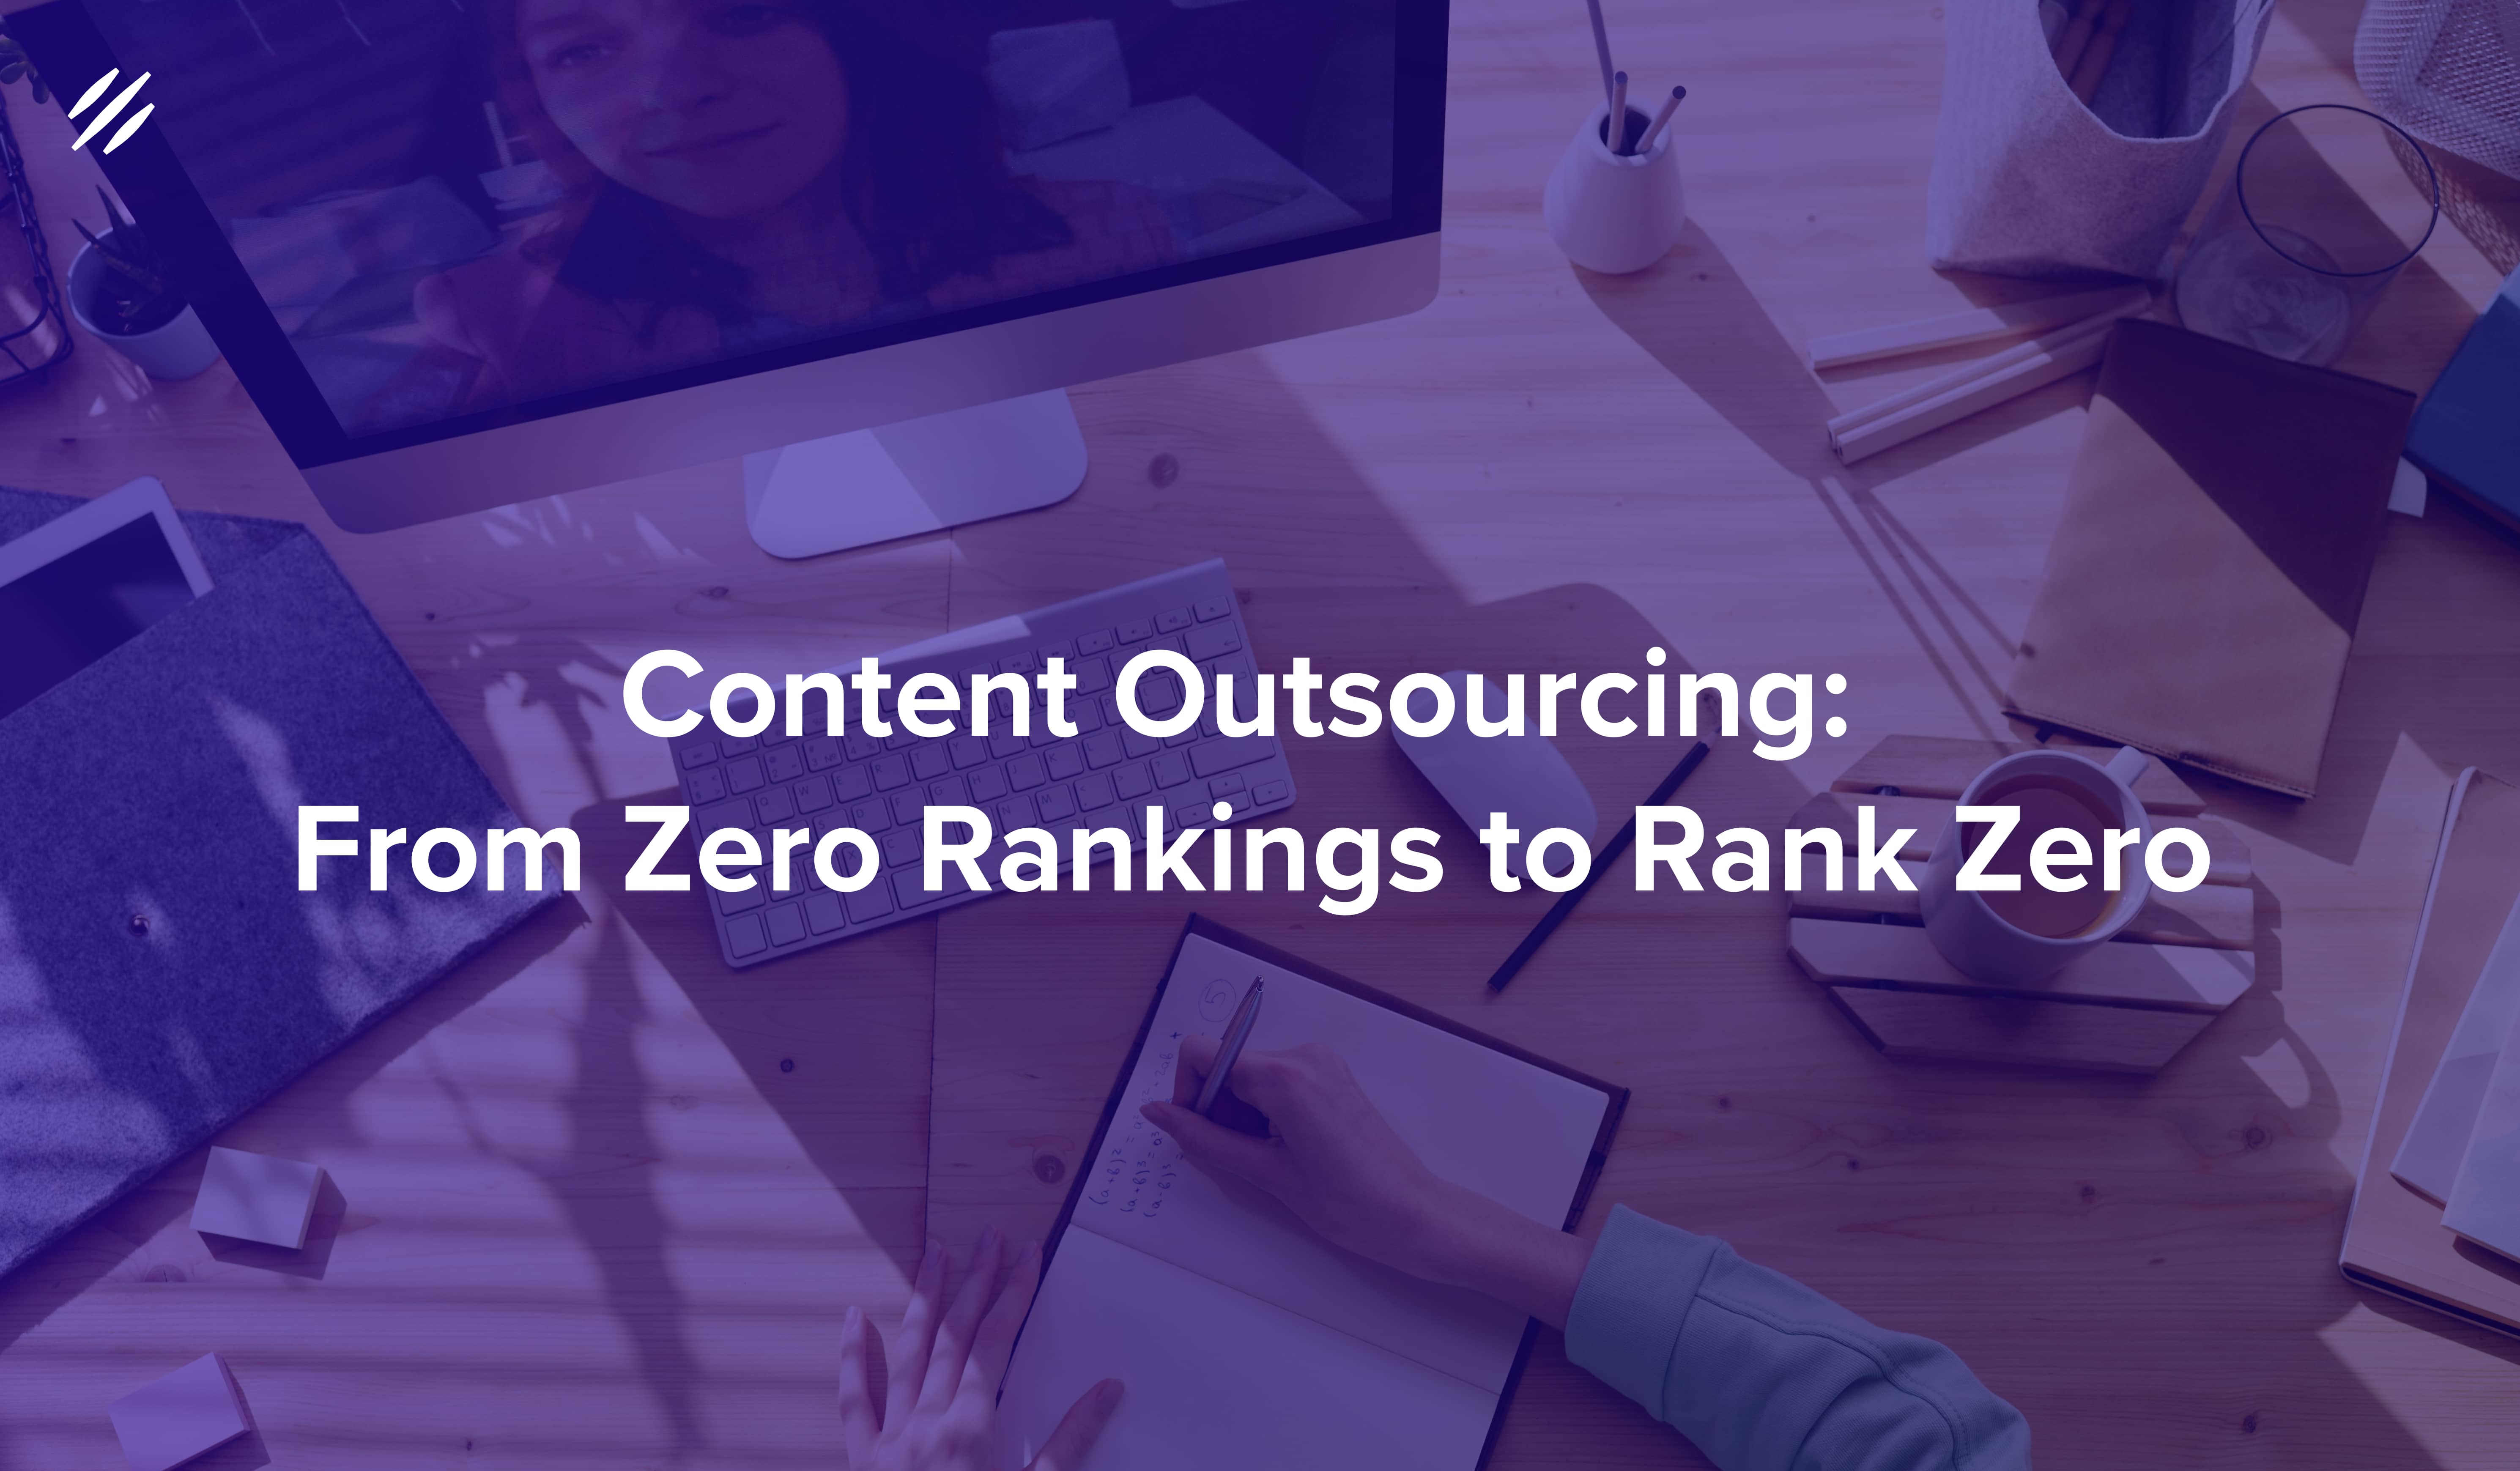 Content Outsourcing: From Zero Rankings to Rank Zero